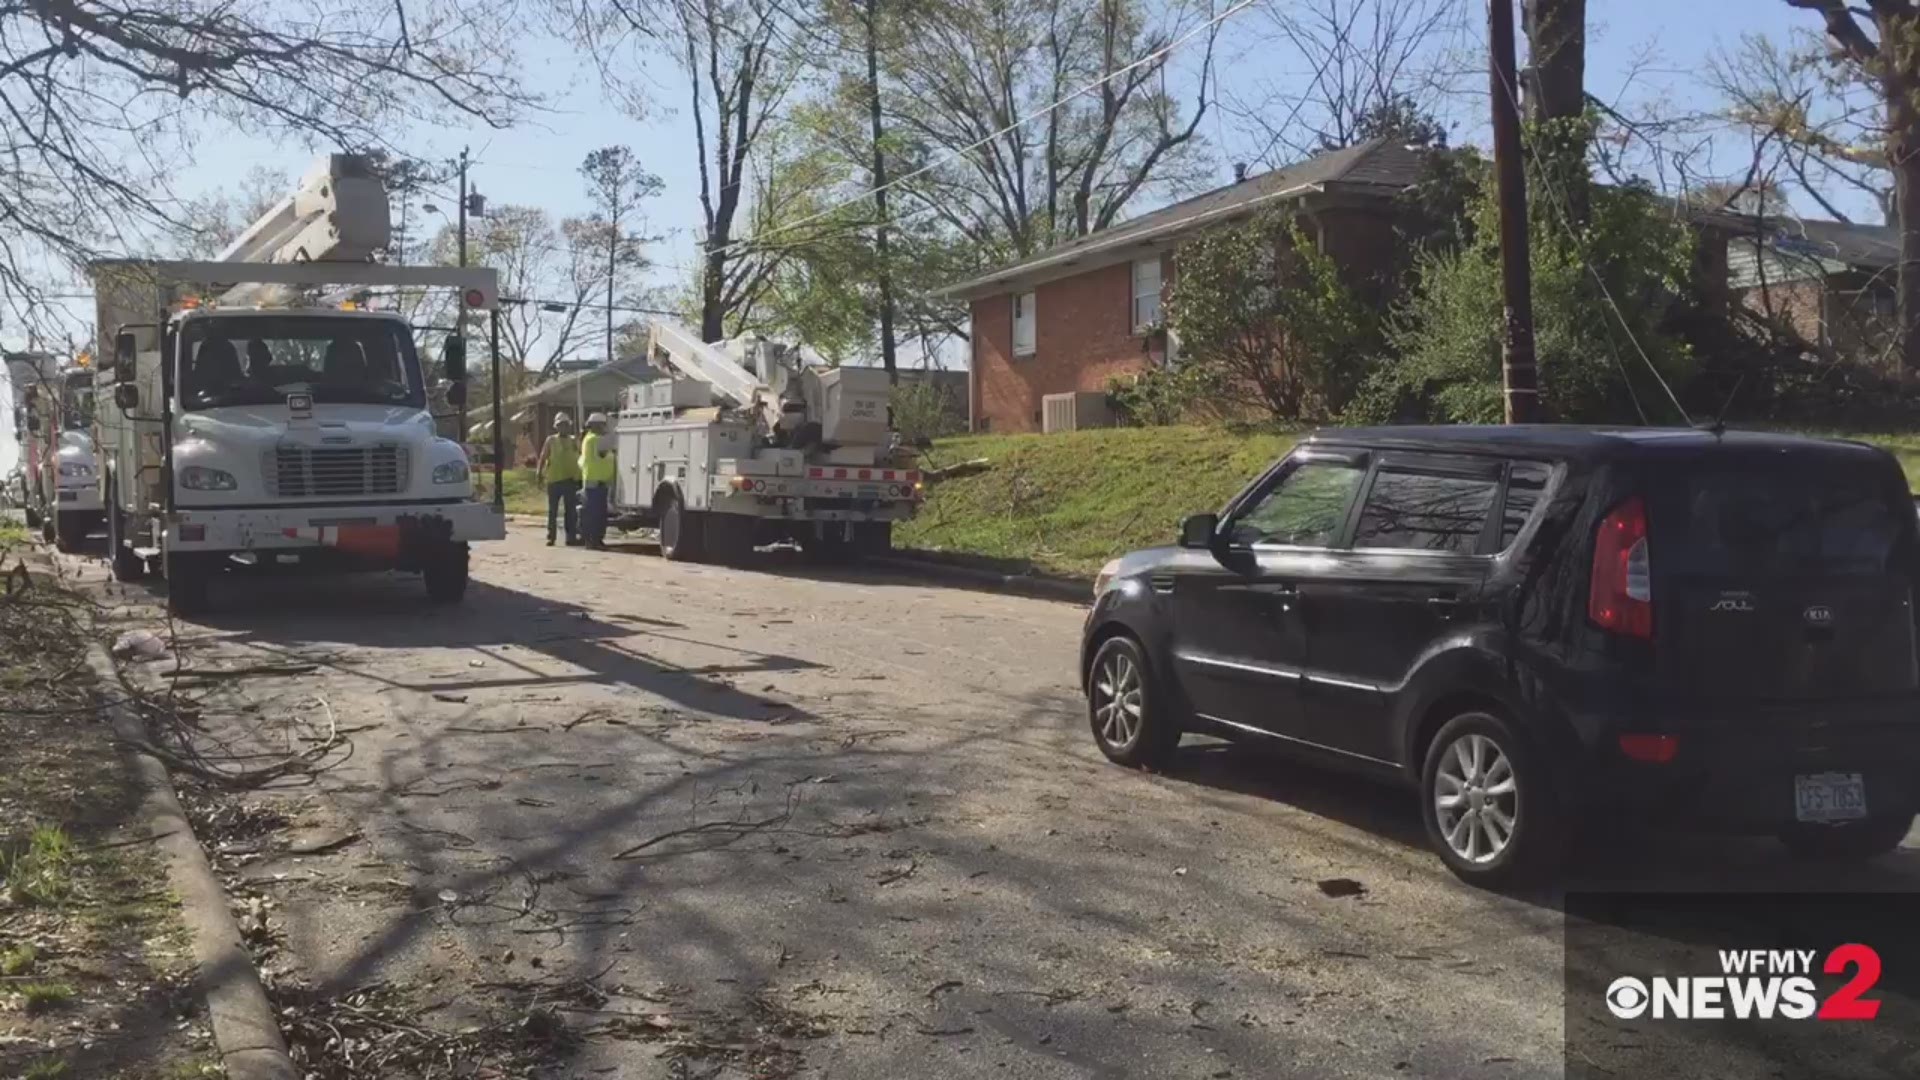 After Sunday's tornado, thousands were left without power in Greensboro. Days later, some still are without it, but electric companies hope power will be on by the end of the week.